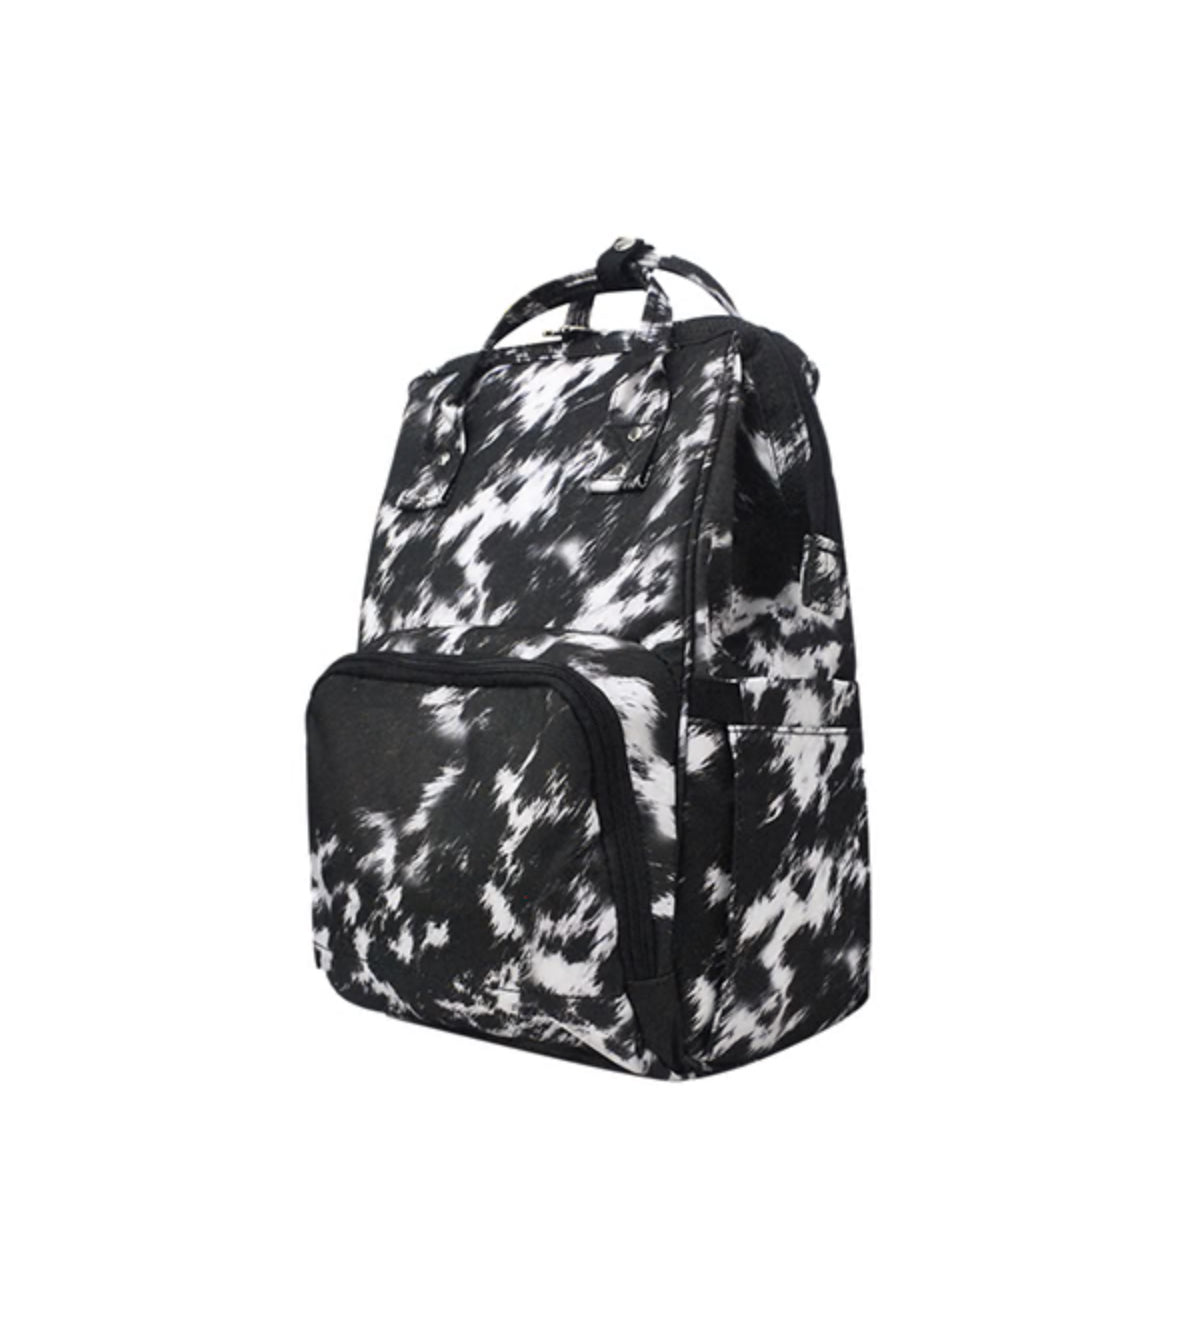 Cow Couture Travel/Diaper Bag